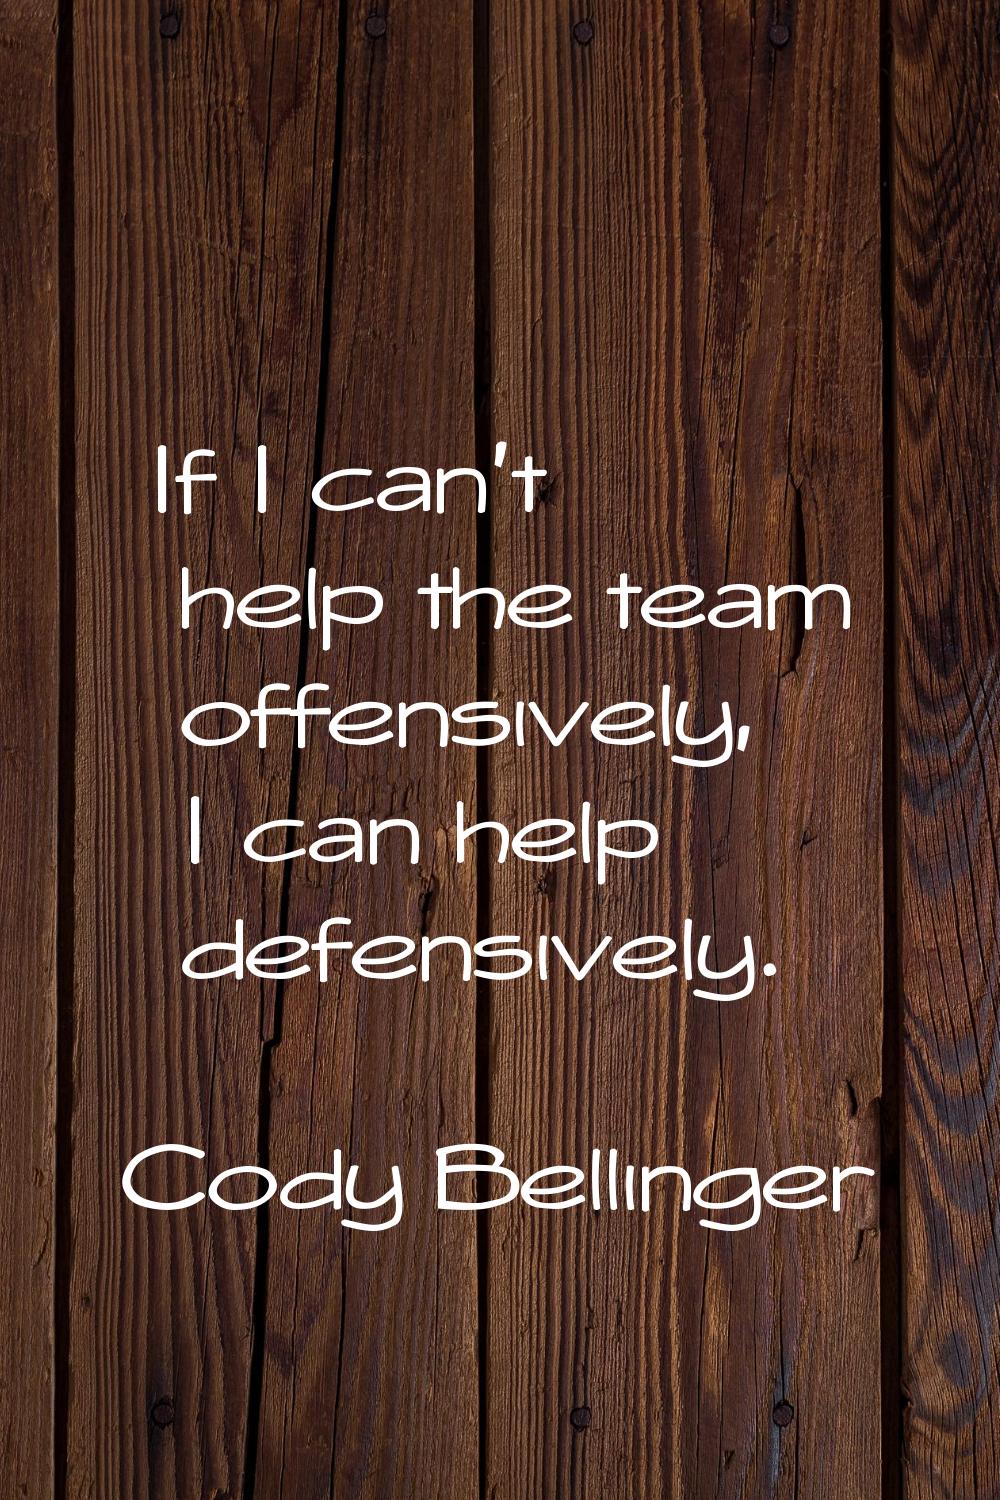 If I can't help the team offensively, I can help defensively.